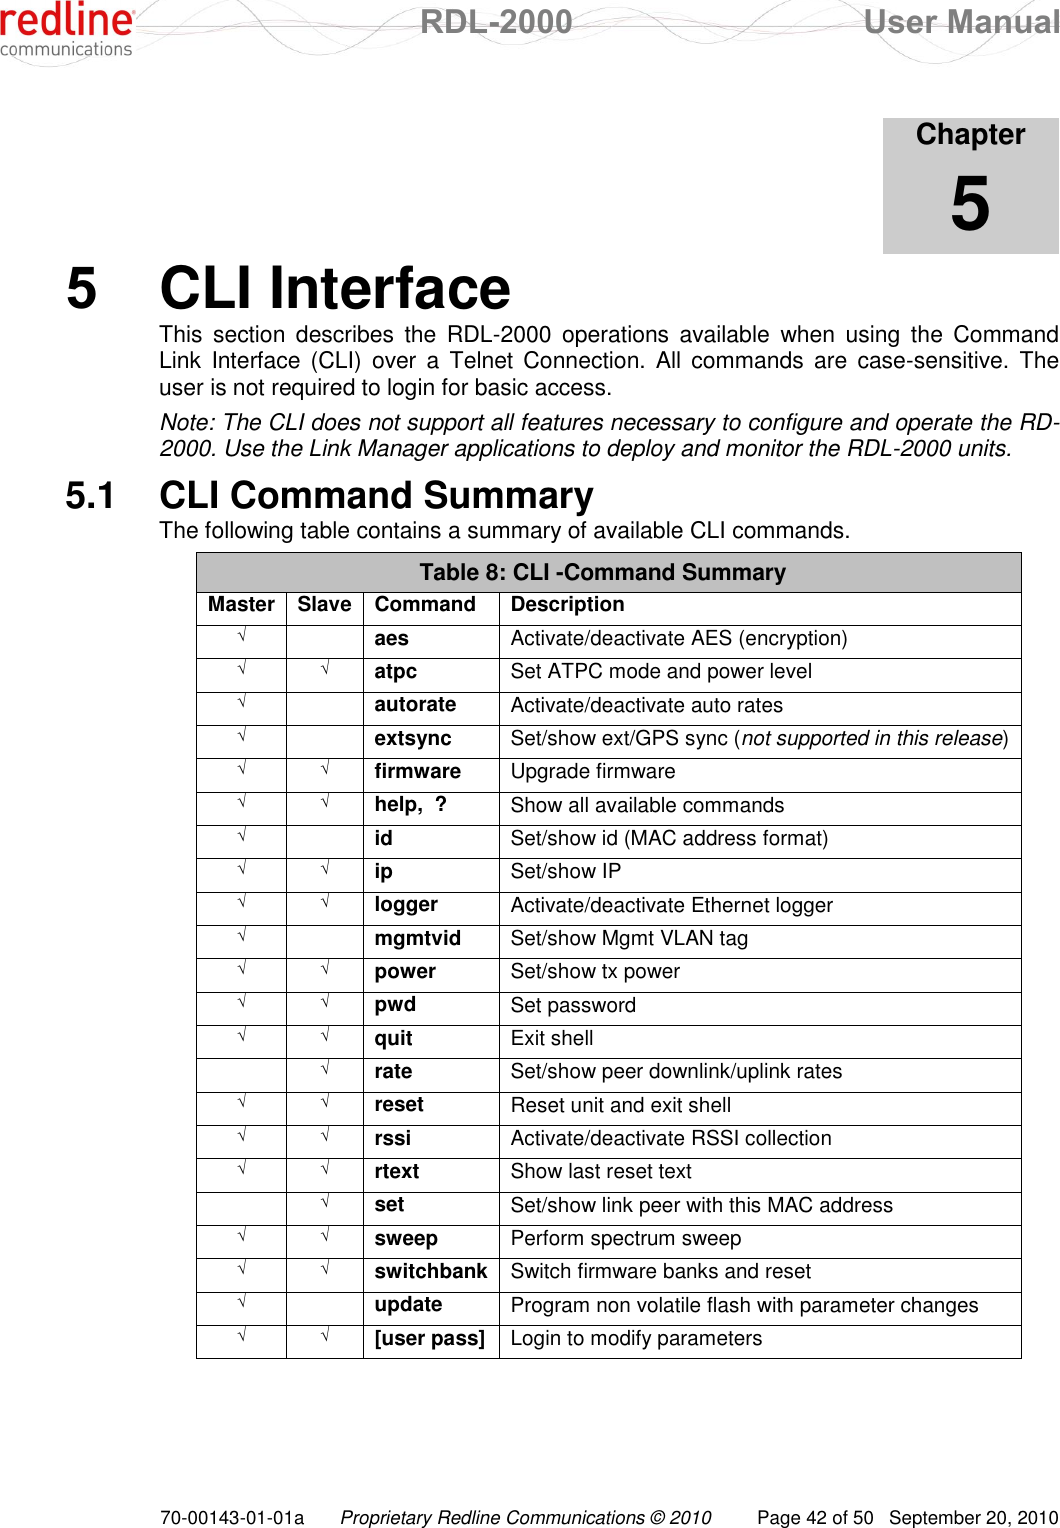  RDL-2000  User Manual 70-00143-01-01a Proprietary Redline Communications © 2010  Page 42 of 50  September 20, 2010            Chapter 5 5  CLI Interface This  section  describes  the  RDL-2000  operations  available  when  using  the  Command Link  Interface (CLI)  over  a  Telnet  Connection. All commands are  case-sensitive. The user is not required to login for basic access. Note: The CLI does not support all features necessary to configure and operate the RD-2000. Use the Link Manager applications to deploy and monitor the RDL-2000 units. 5.1  CLI Command Summary The following table contains a summary of available CLI commands. Table 8: CLI -Command Summary Master Slave Command Description √  aes Activate/deactivate AES (encryption) √ √ atpc Set ATPC mode and power level √  autorate Activate/deactivate auto rates √  extsync Set/show ext/GPS sync (not supported in this release) √ √ firmware Upgrade firmware √ √ help,  ? Show all available commands √  id  Set/show id (MAC address format) √ √ ip Set/show IP √ √ logger Activate/deactivate Ethernet logger √  mgmtvid Set/show Mgmt VLAN tag √ √ power Set/show tx power √ √ pwd Set password √ √ quit Exit shell  √ rate Set/show peer downlink/uplink rates √ √ reset Reset unit and exit shell √ √ rssi Activate/deactivate RSSI collection √ √ rtext Show last reset text  √ set Set/show link peer with this MAC address √ √ sweep Perform spectrum sweep √ √ switchbank Switch firmware banks and reset √  update Program non volatile flash with parameter changes √ √ [user pass] Login to modify parameters  